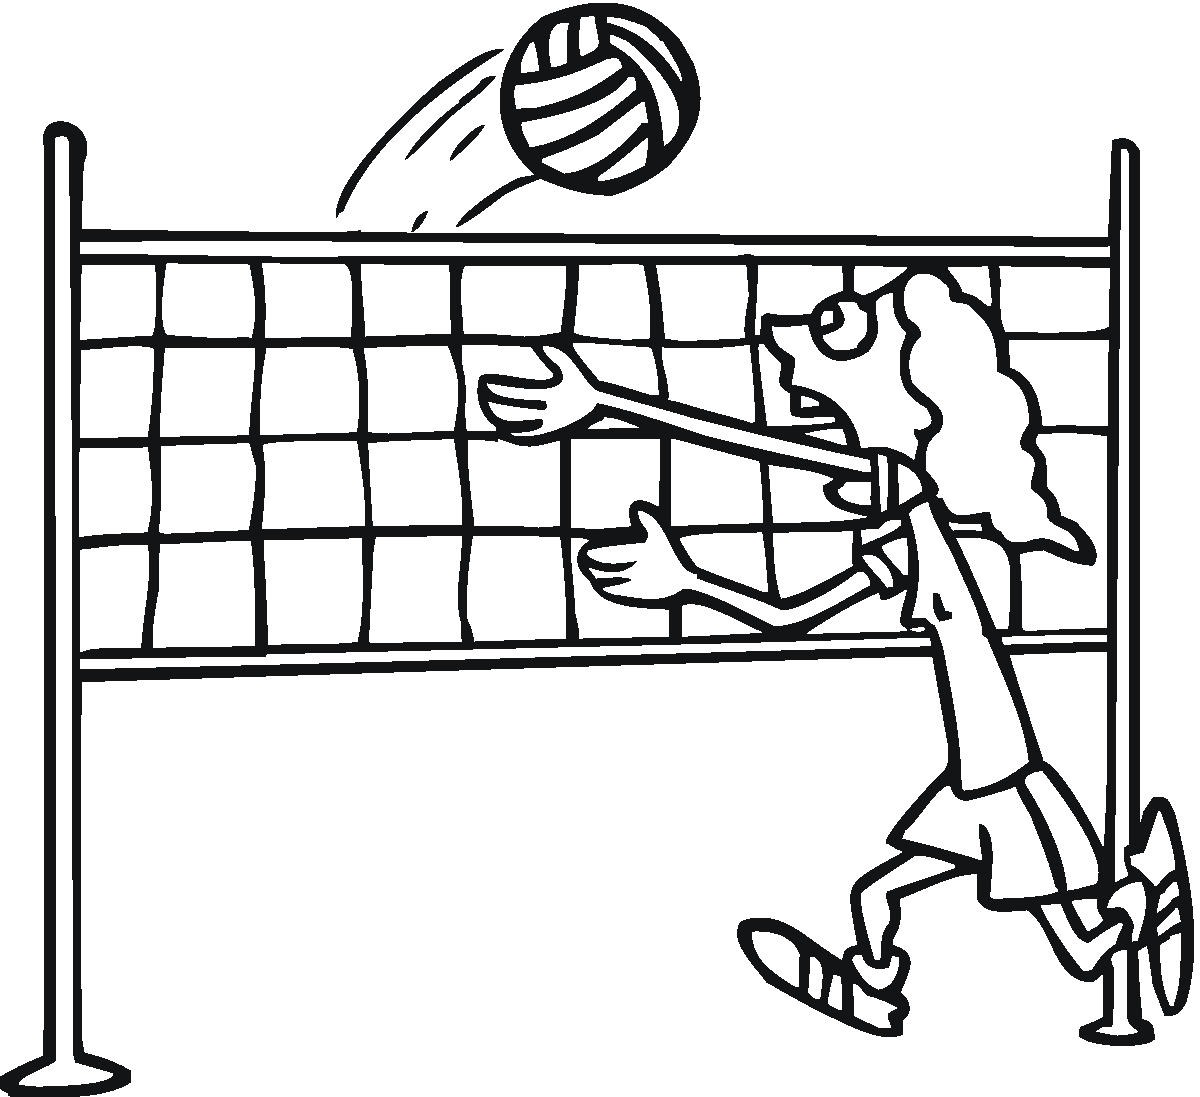 Volleyball ball and net clipart